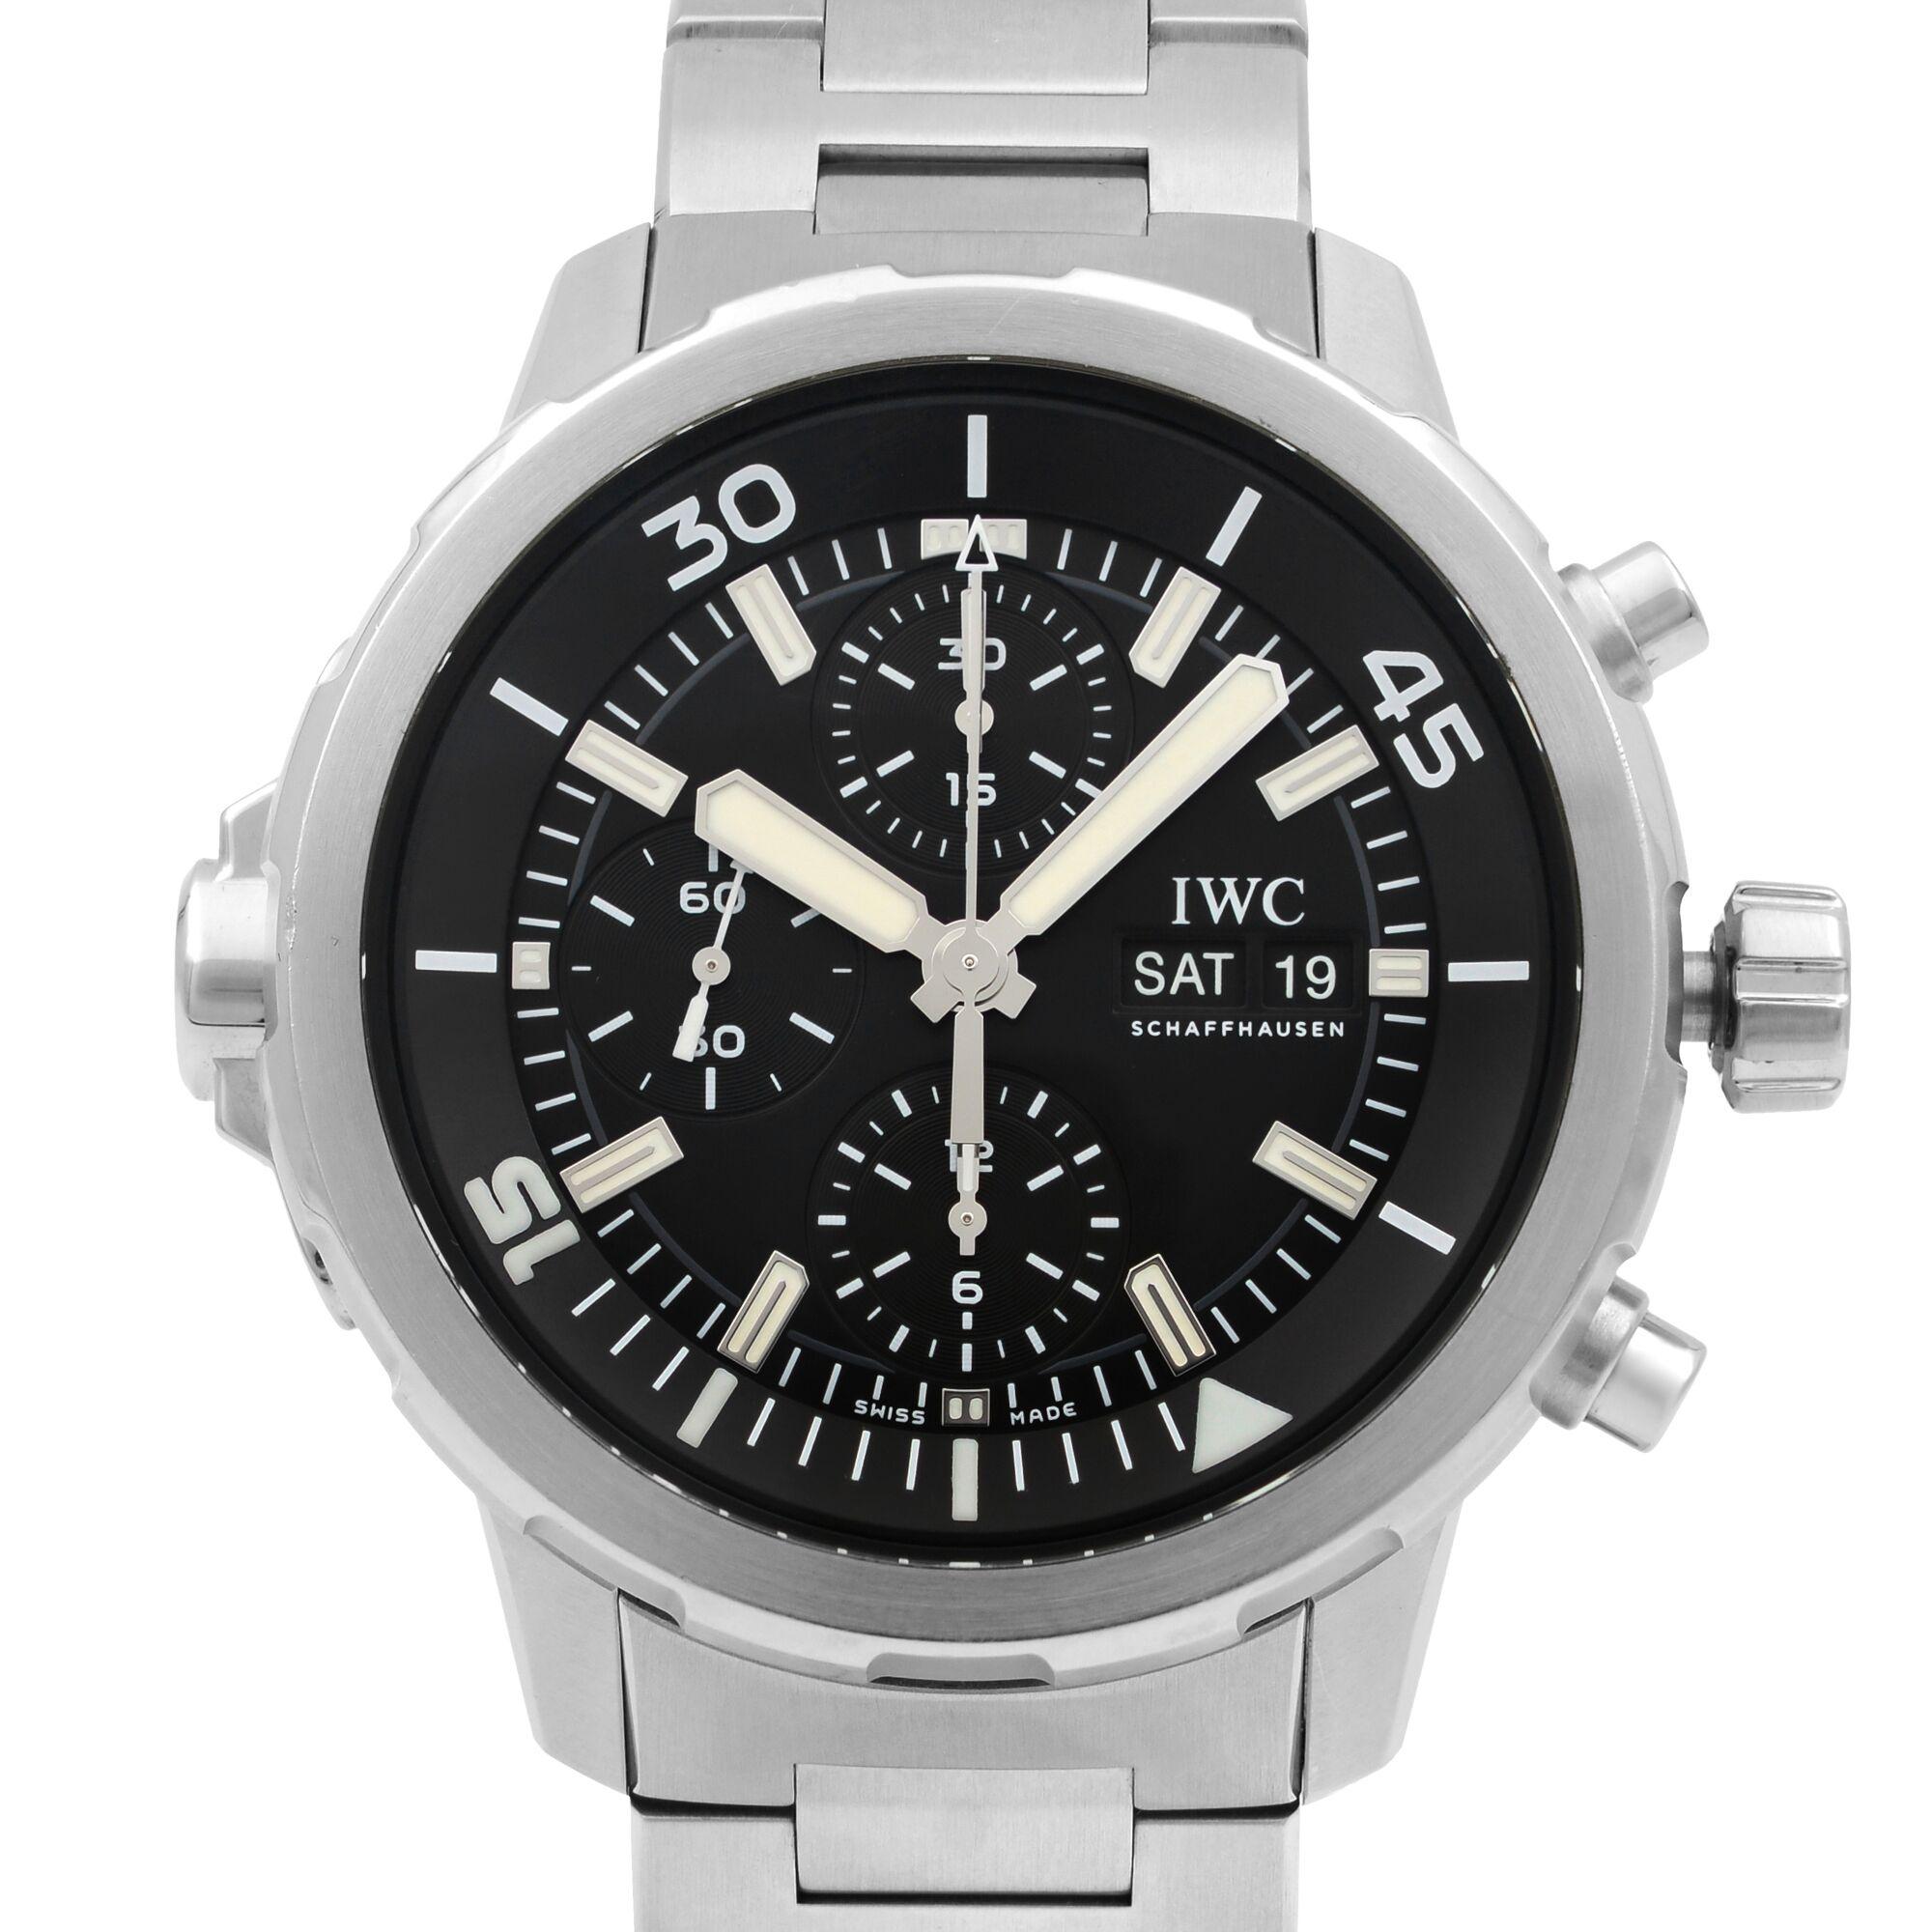 This pre-owned IWC Aquatimer IW376804 is a beautiful men's timepiece that is powered by mechanical (automatic) movement which is cased in a stainless steel case. It has a round shape face, day indicator, chronograph, chronograph hand, date